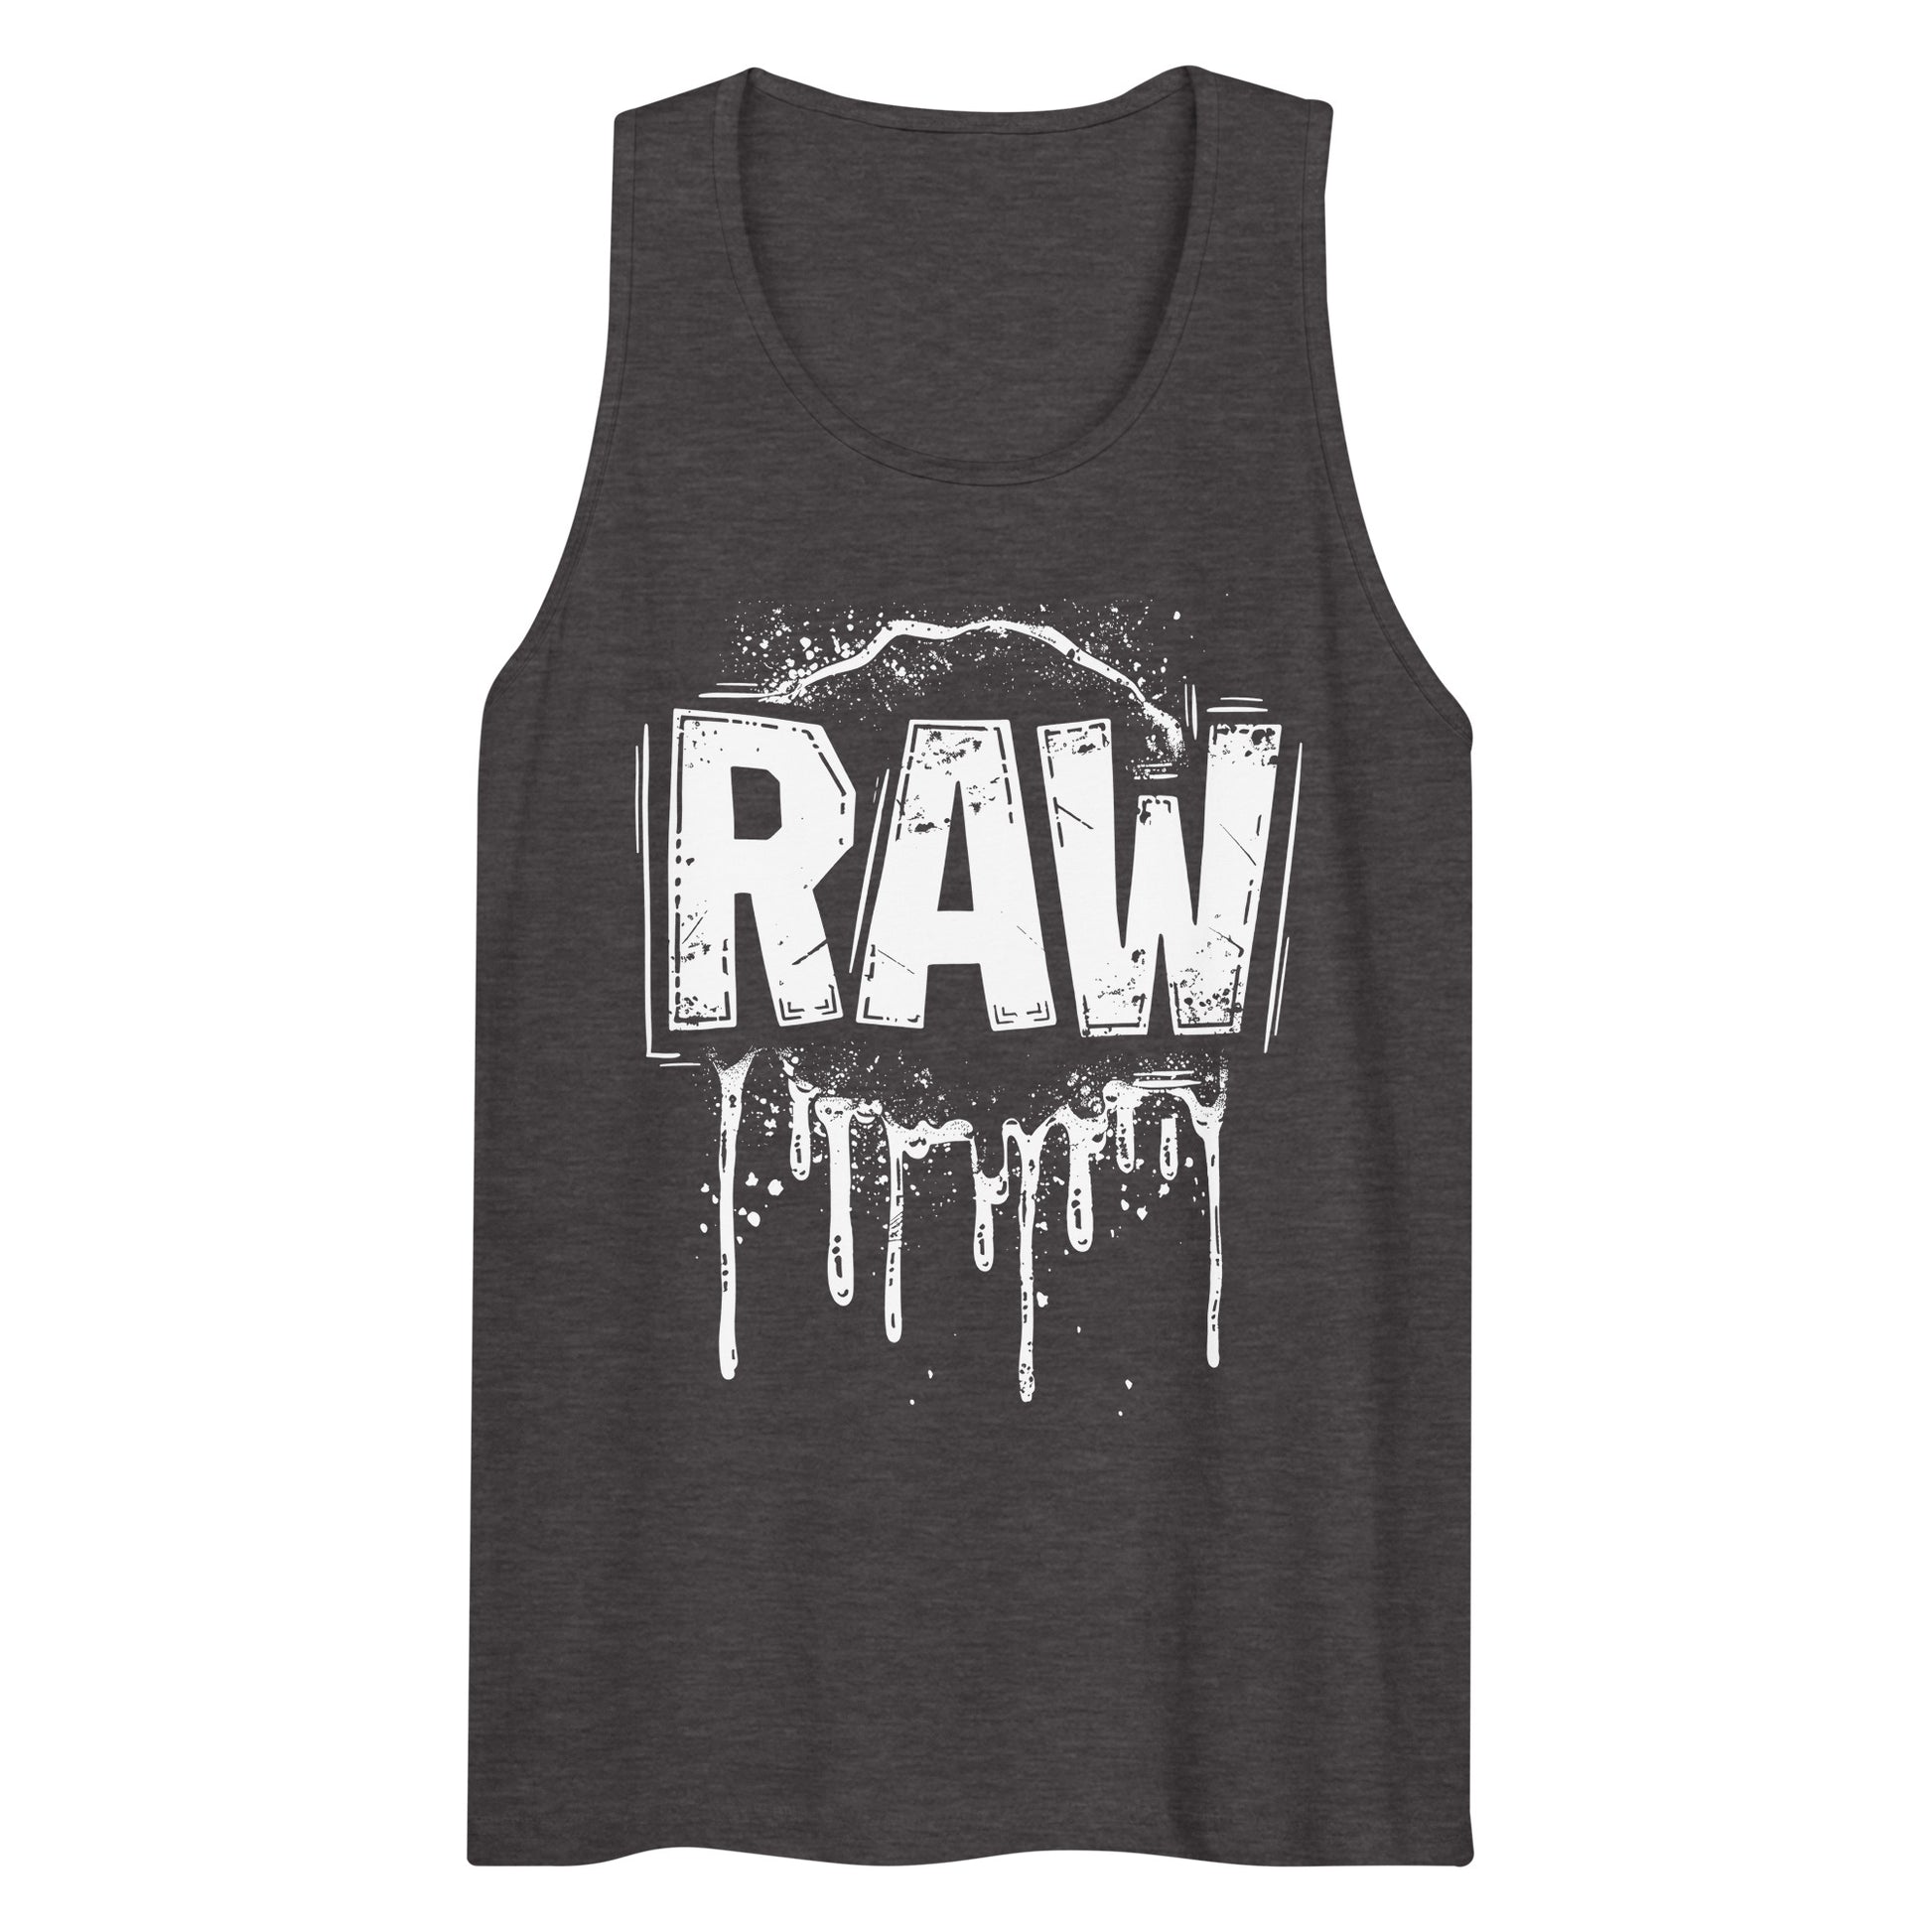 Unleashed Desire - RAW Drip Graphic Gay Bear Tank Top